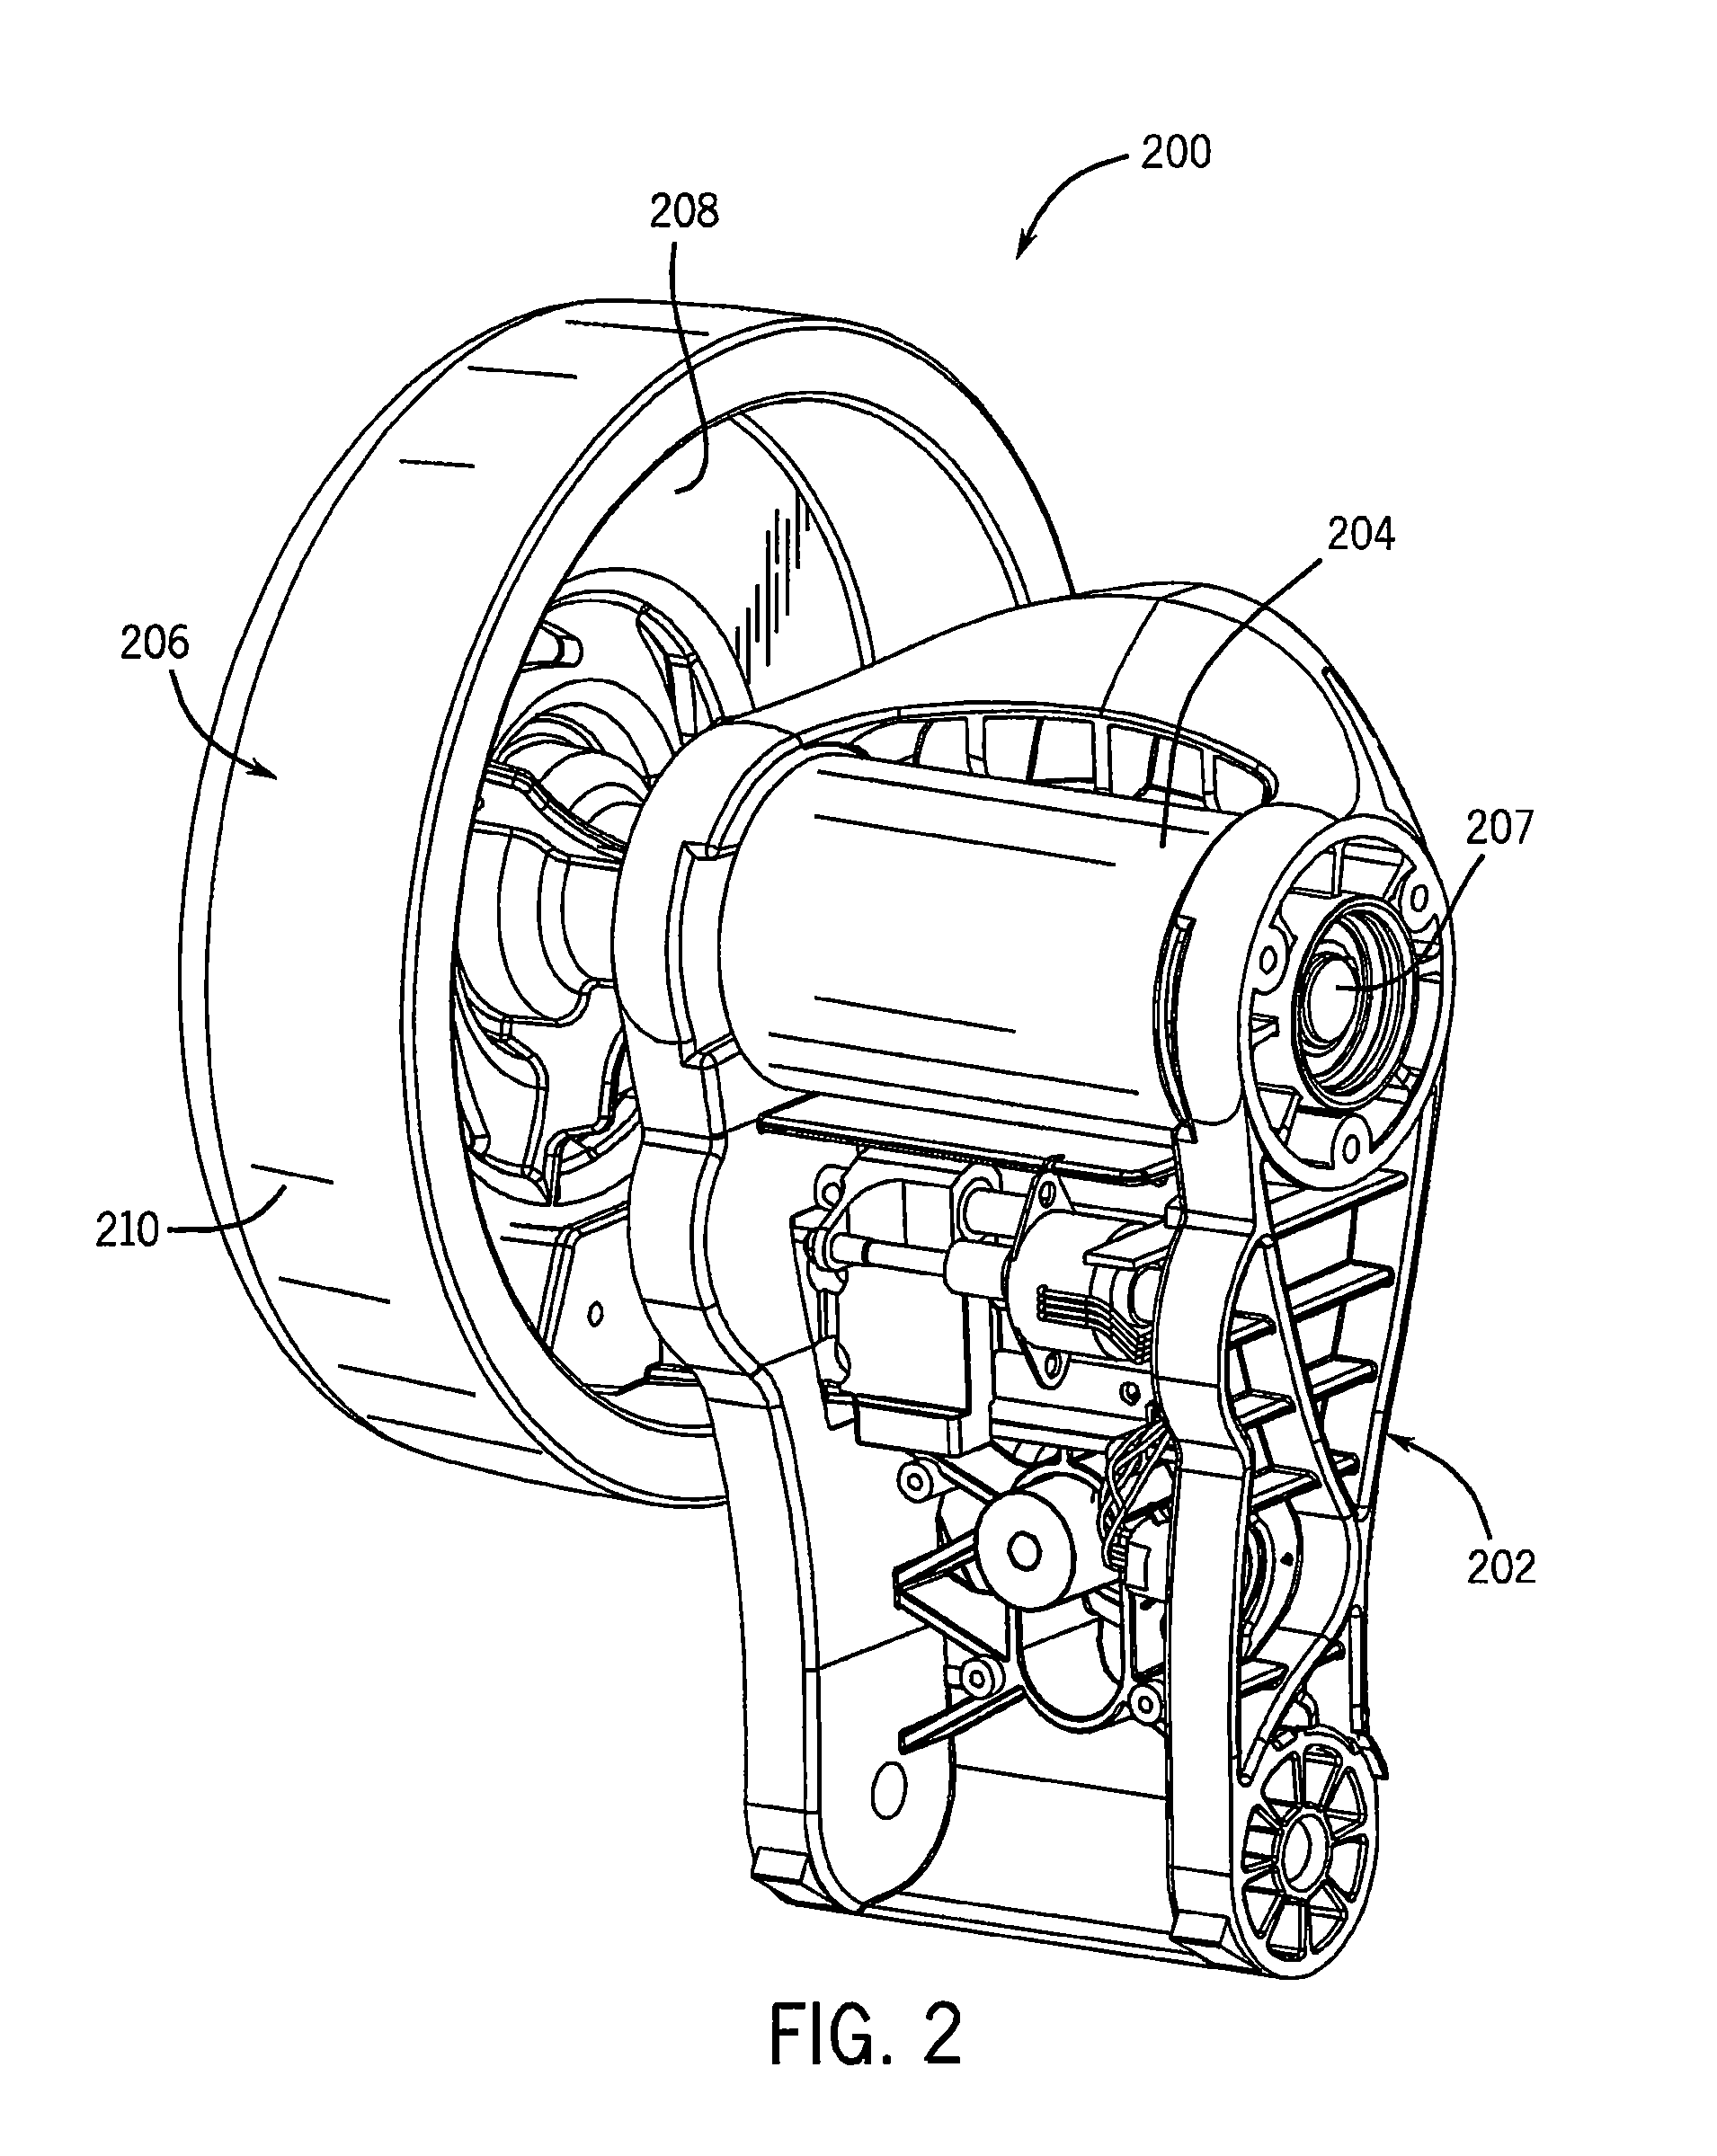 Power sensing eddy current resistance unit for an exercise device